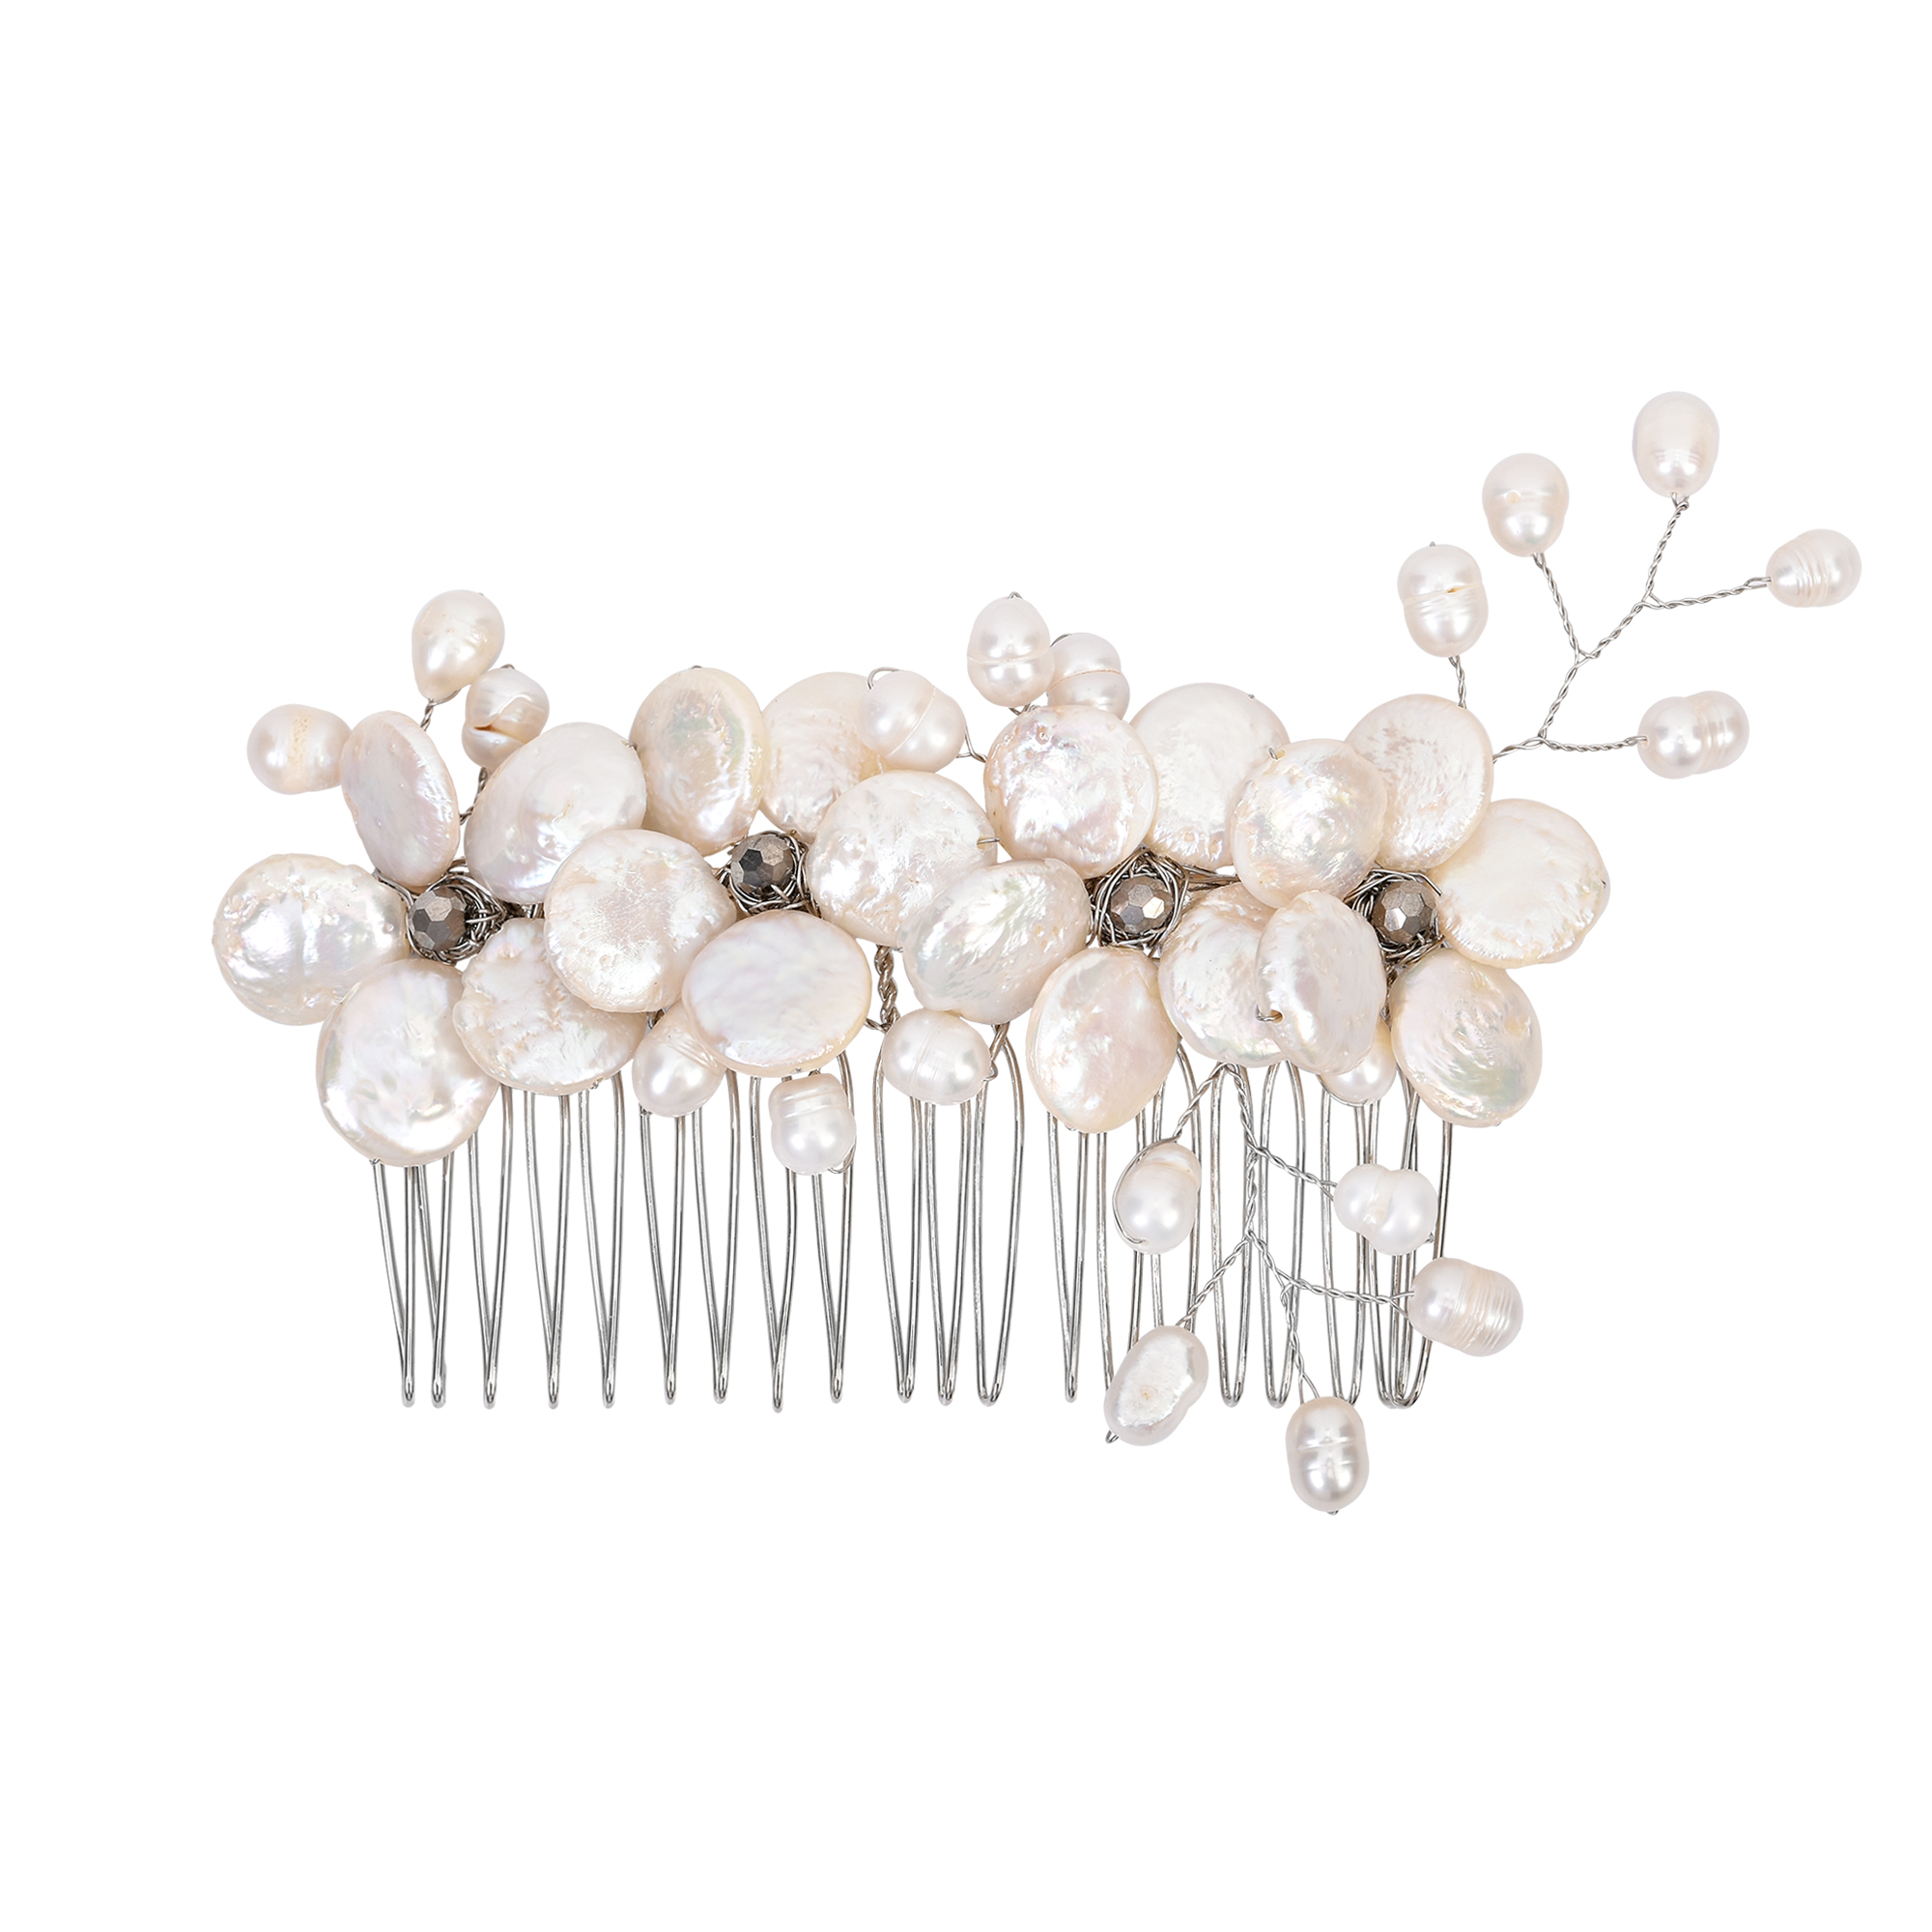 Floral Wreath Freshwater Coin Pearl Bridal Hair Comb - image 1 of 5